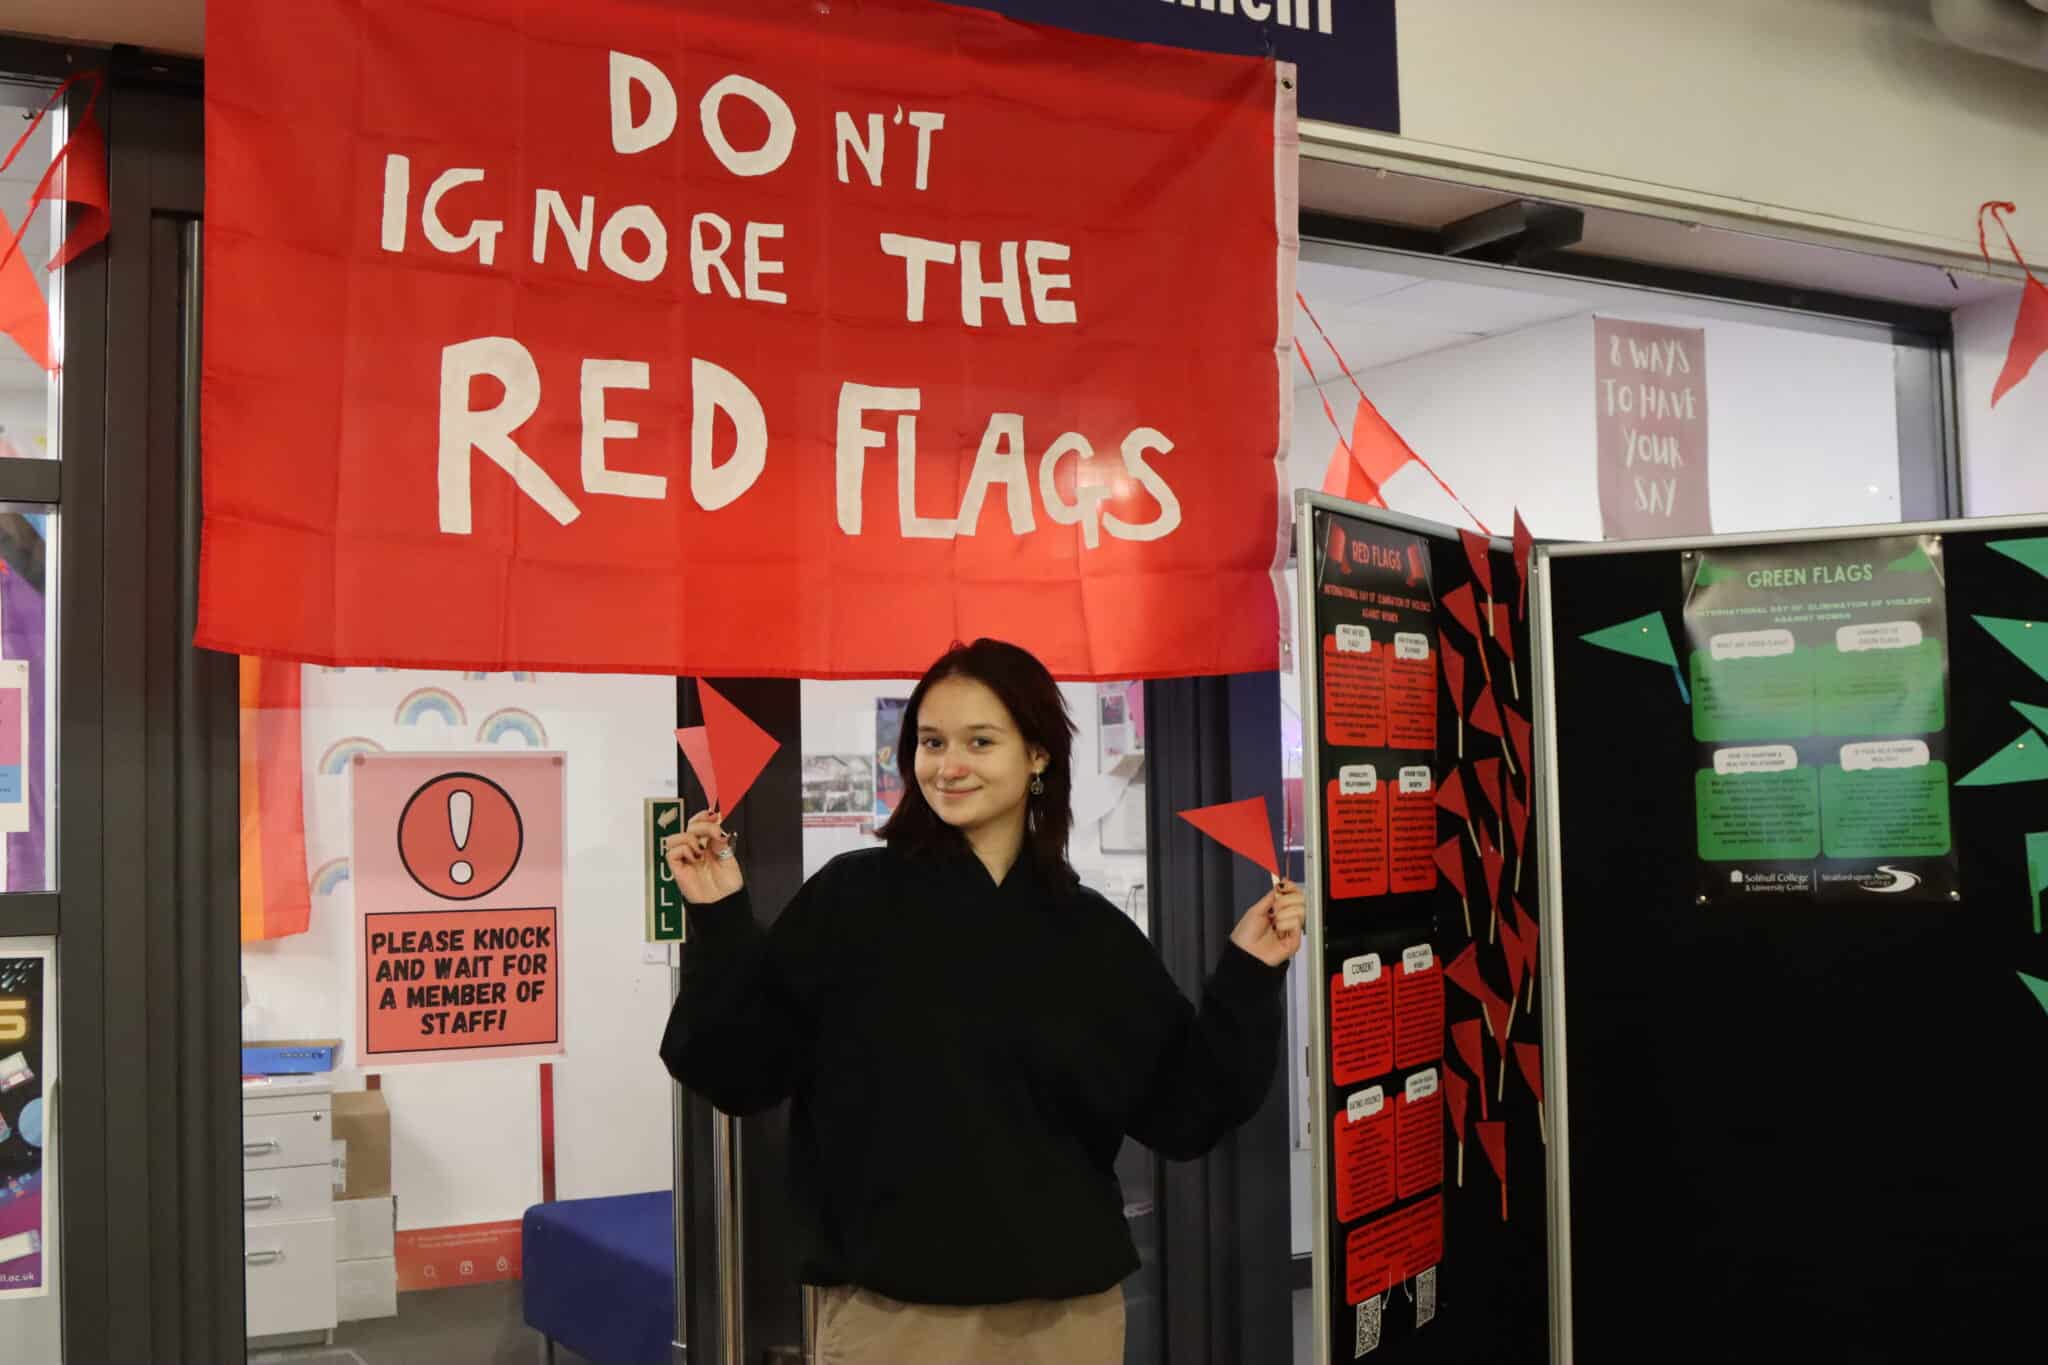 Don't ignore the red flags banner in background student holding flags in front